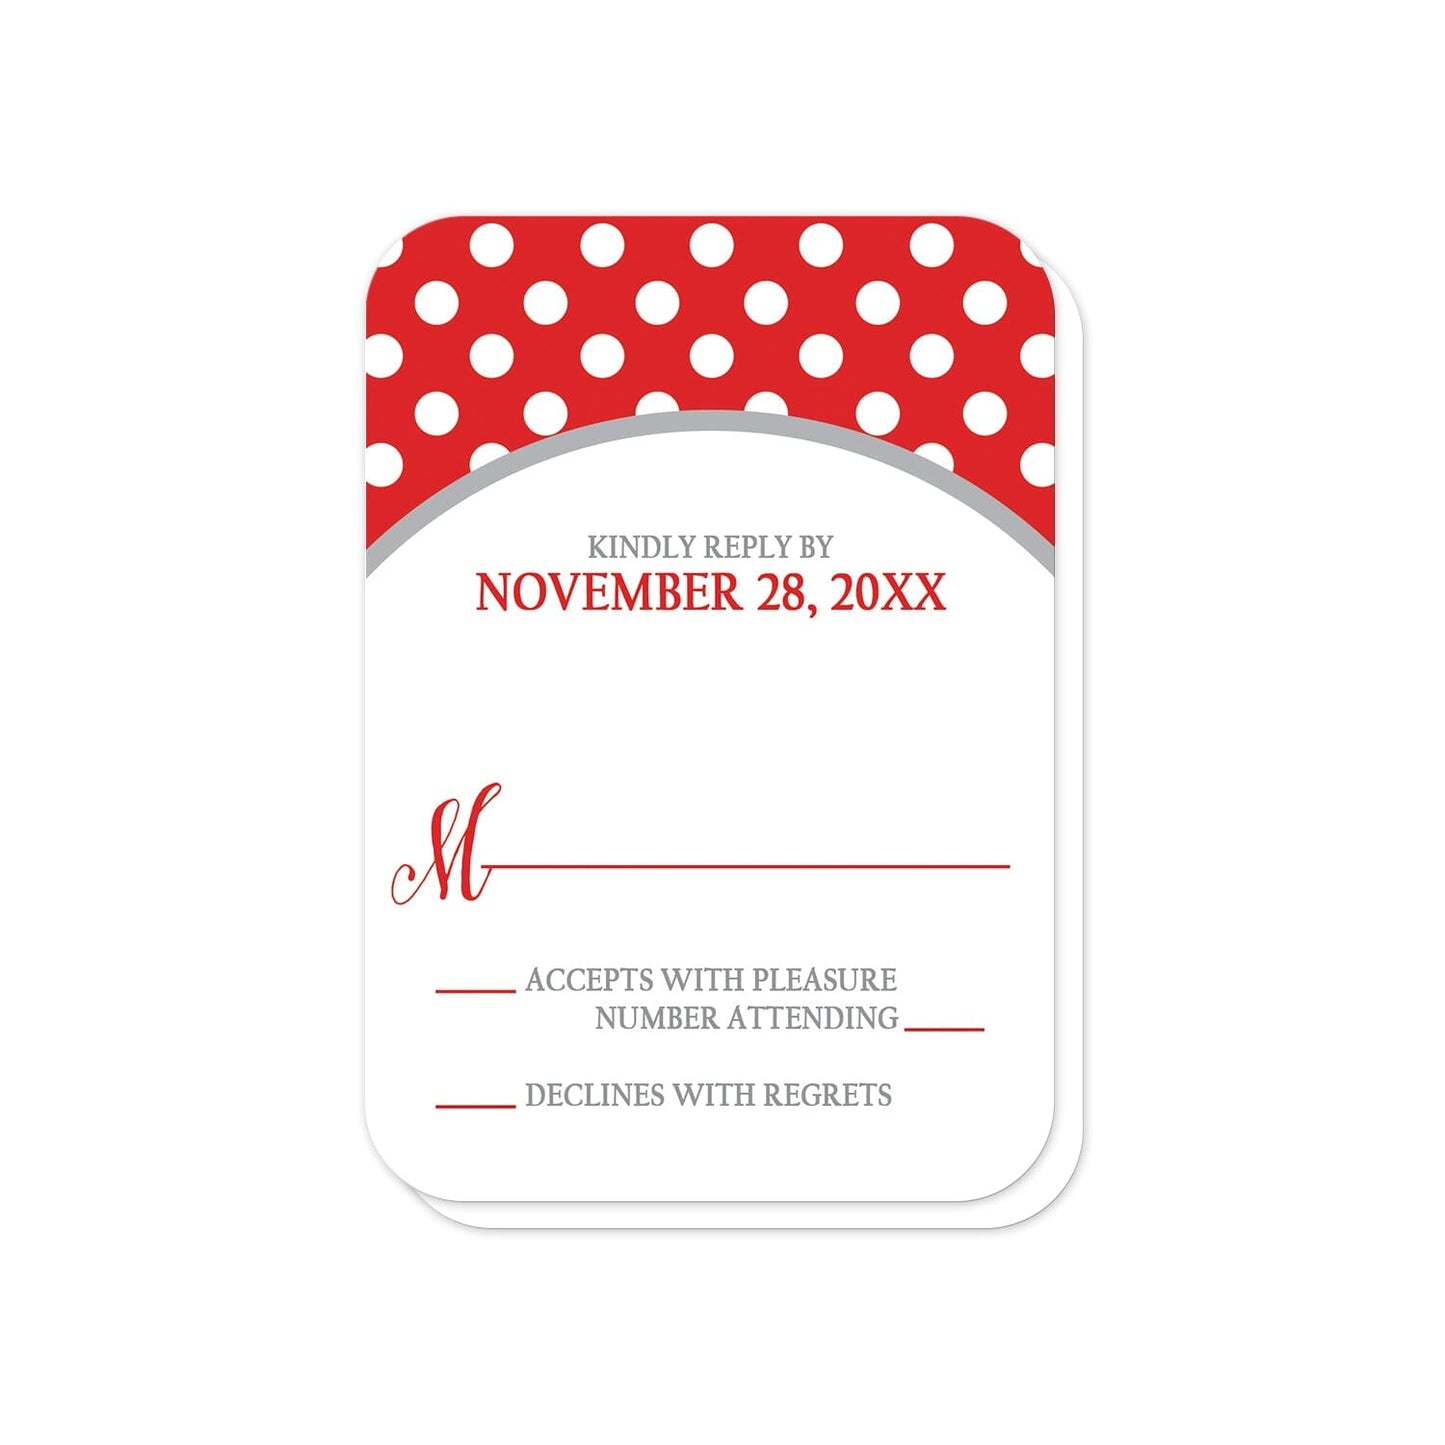 Gray and Red Polka Dot RSVP Cards (with rounded corners) at Artistically Invited.